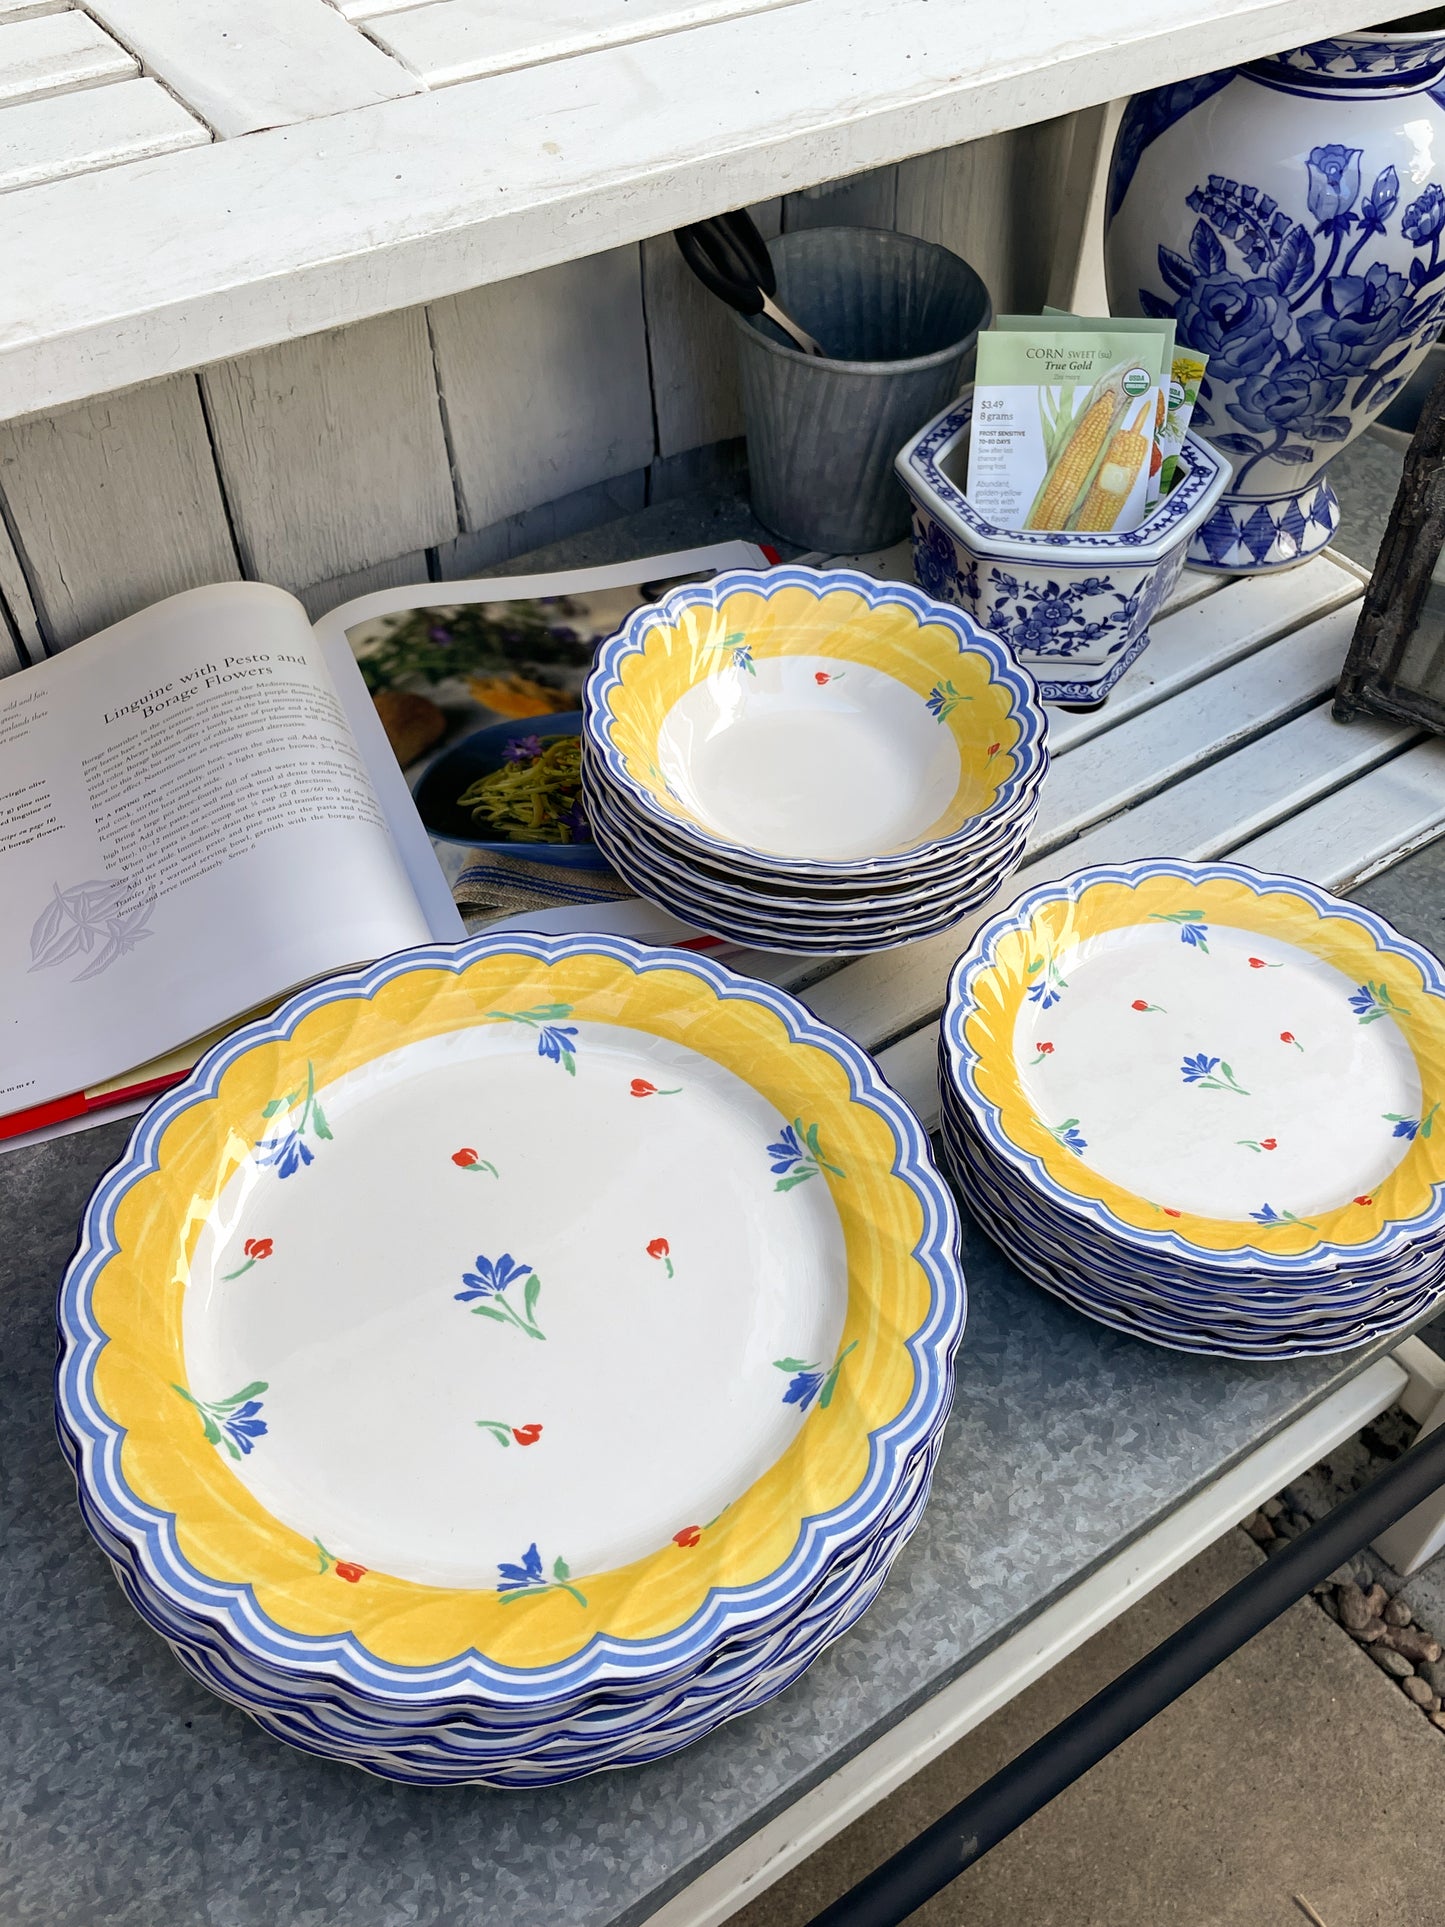 Sunshine and Blue Skies Appetizer Plates